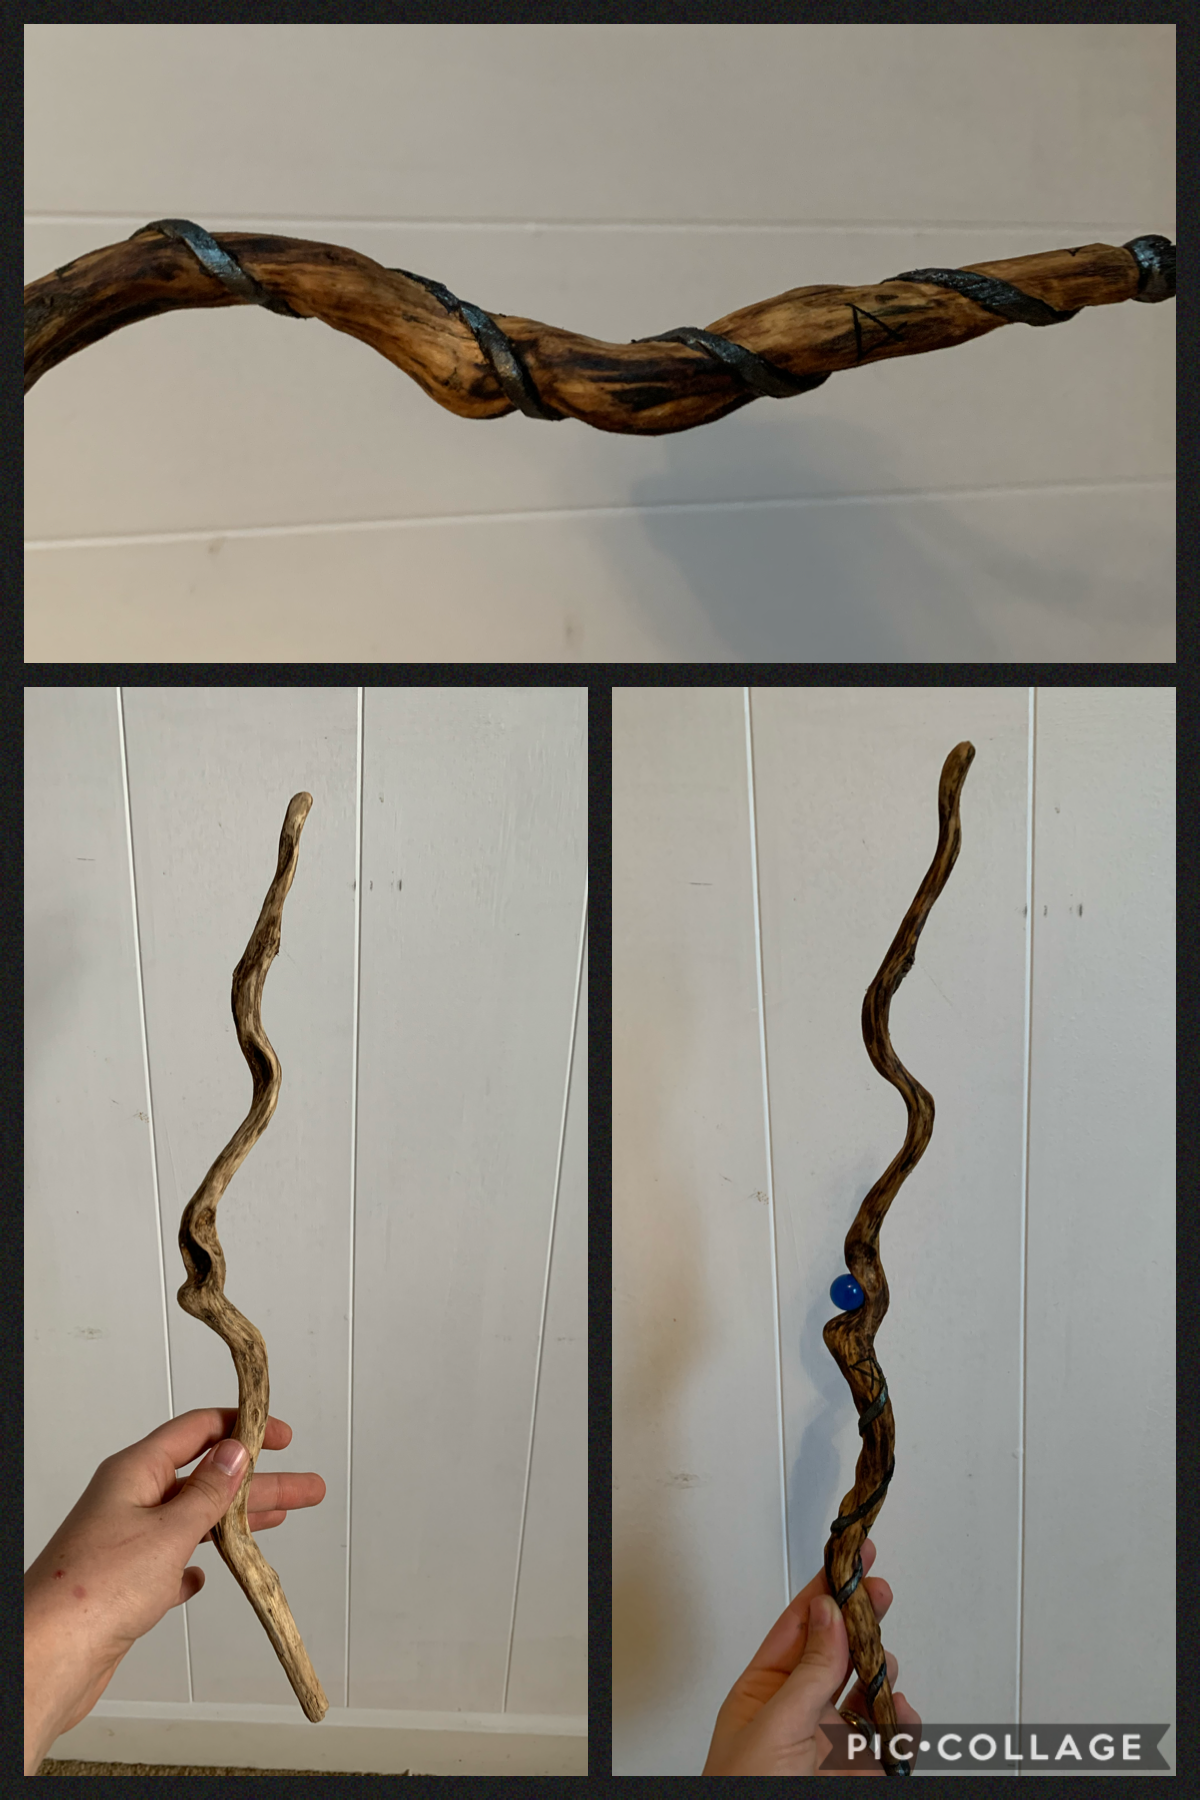 Today’s project: turning a stick into a wizard’s wand